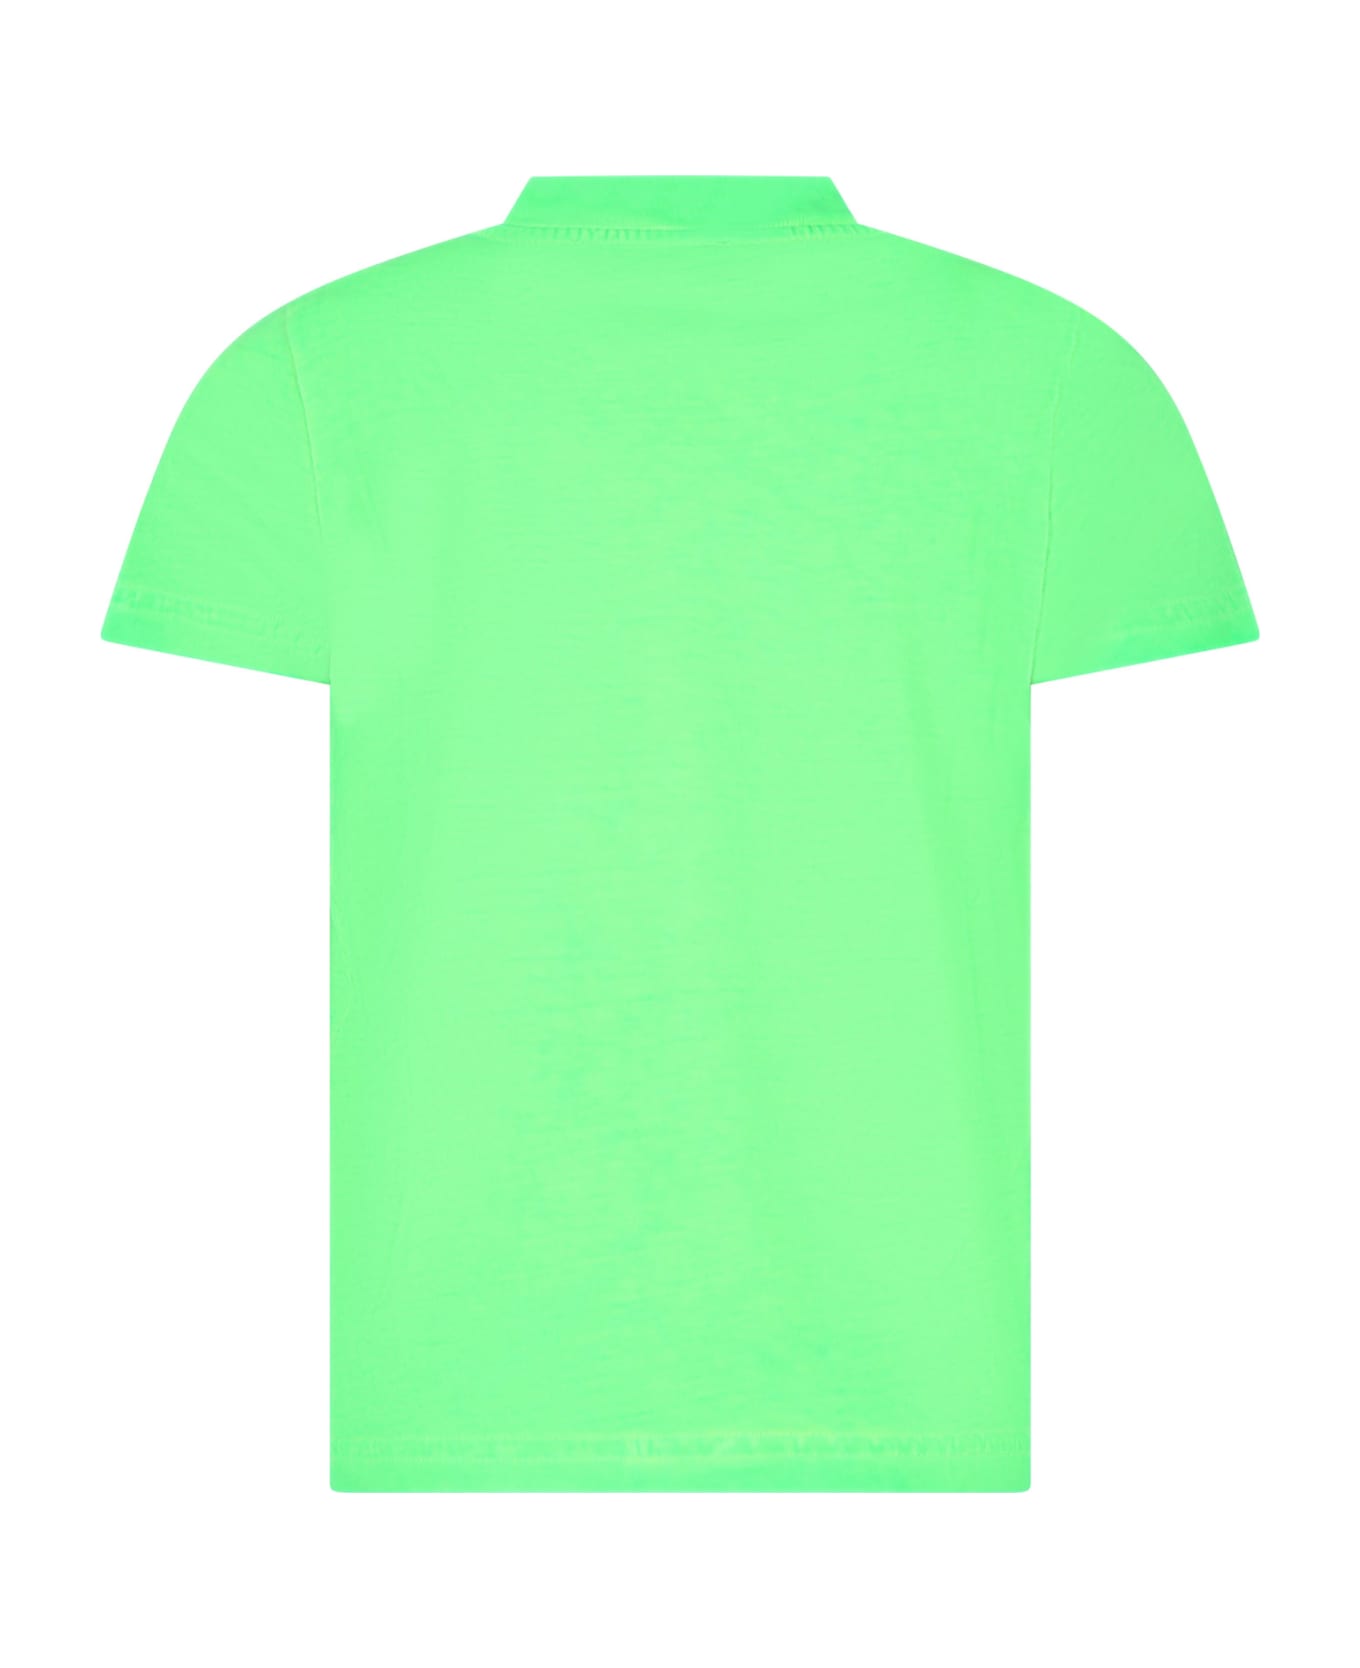 Dsquared2 Green T-shirt For Kids With Logo - Green